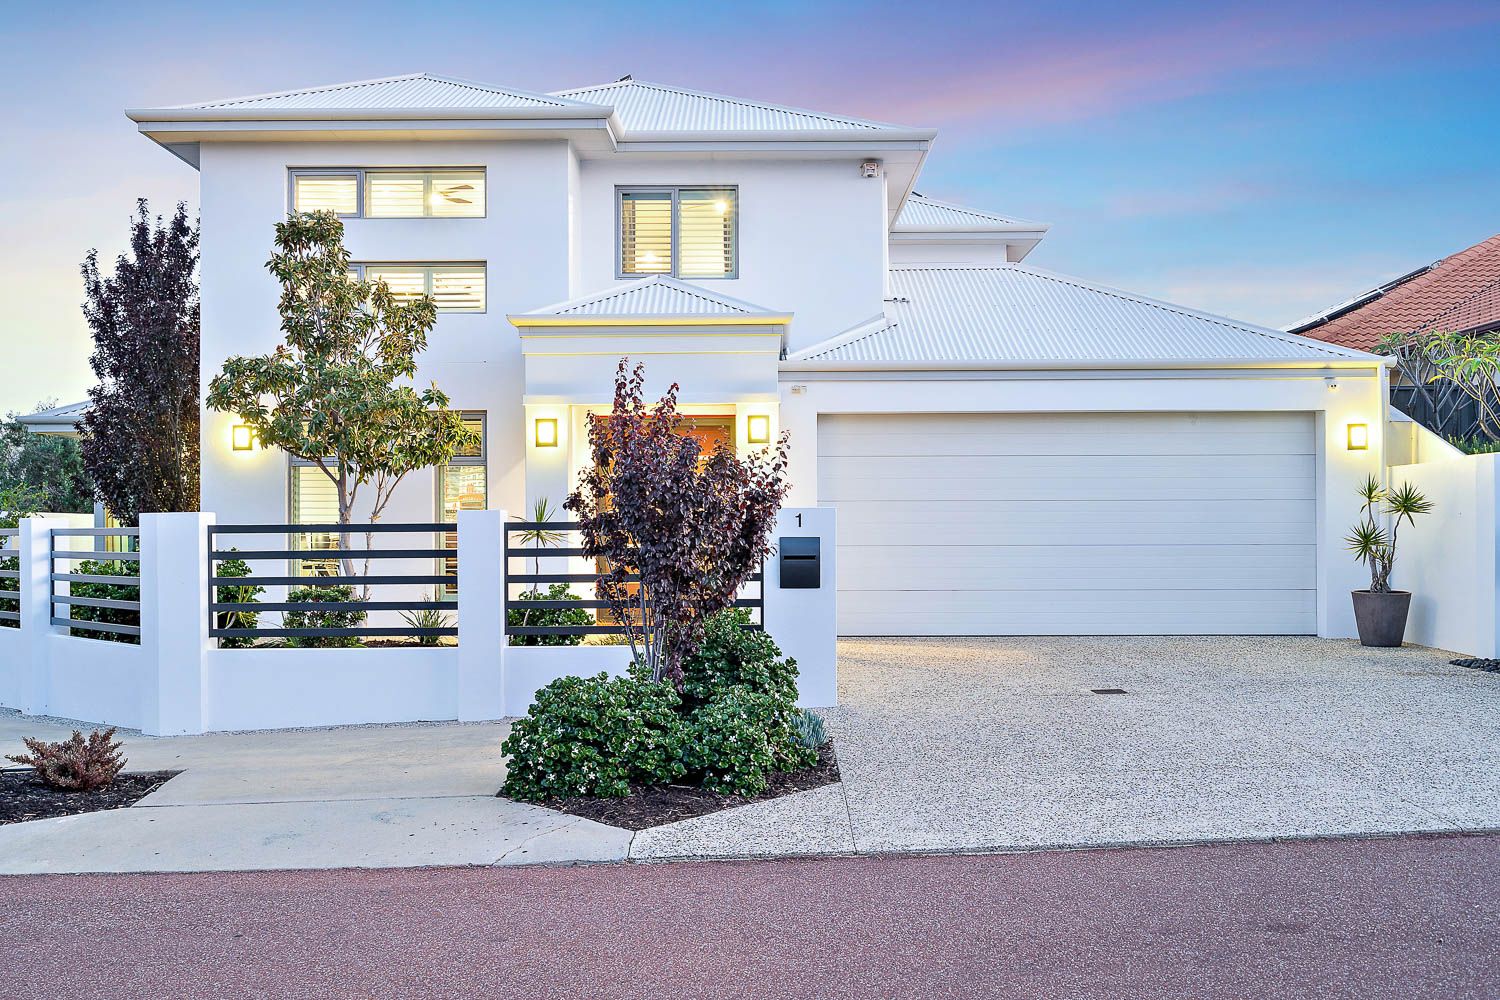 5 bedrooms House in 1 Waterford Street BEACONSFIELD WA, 6162